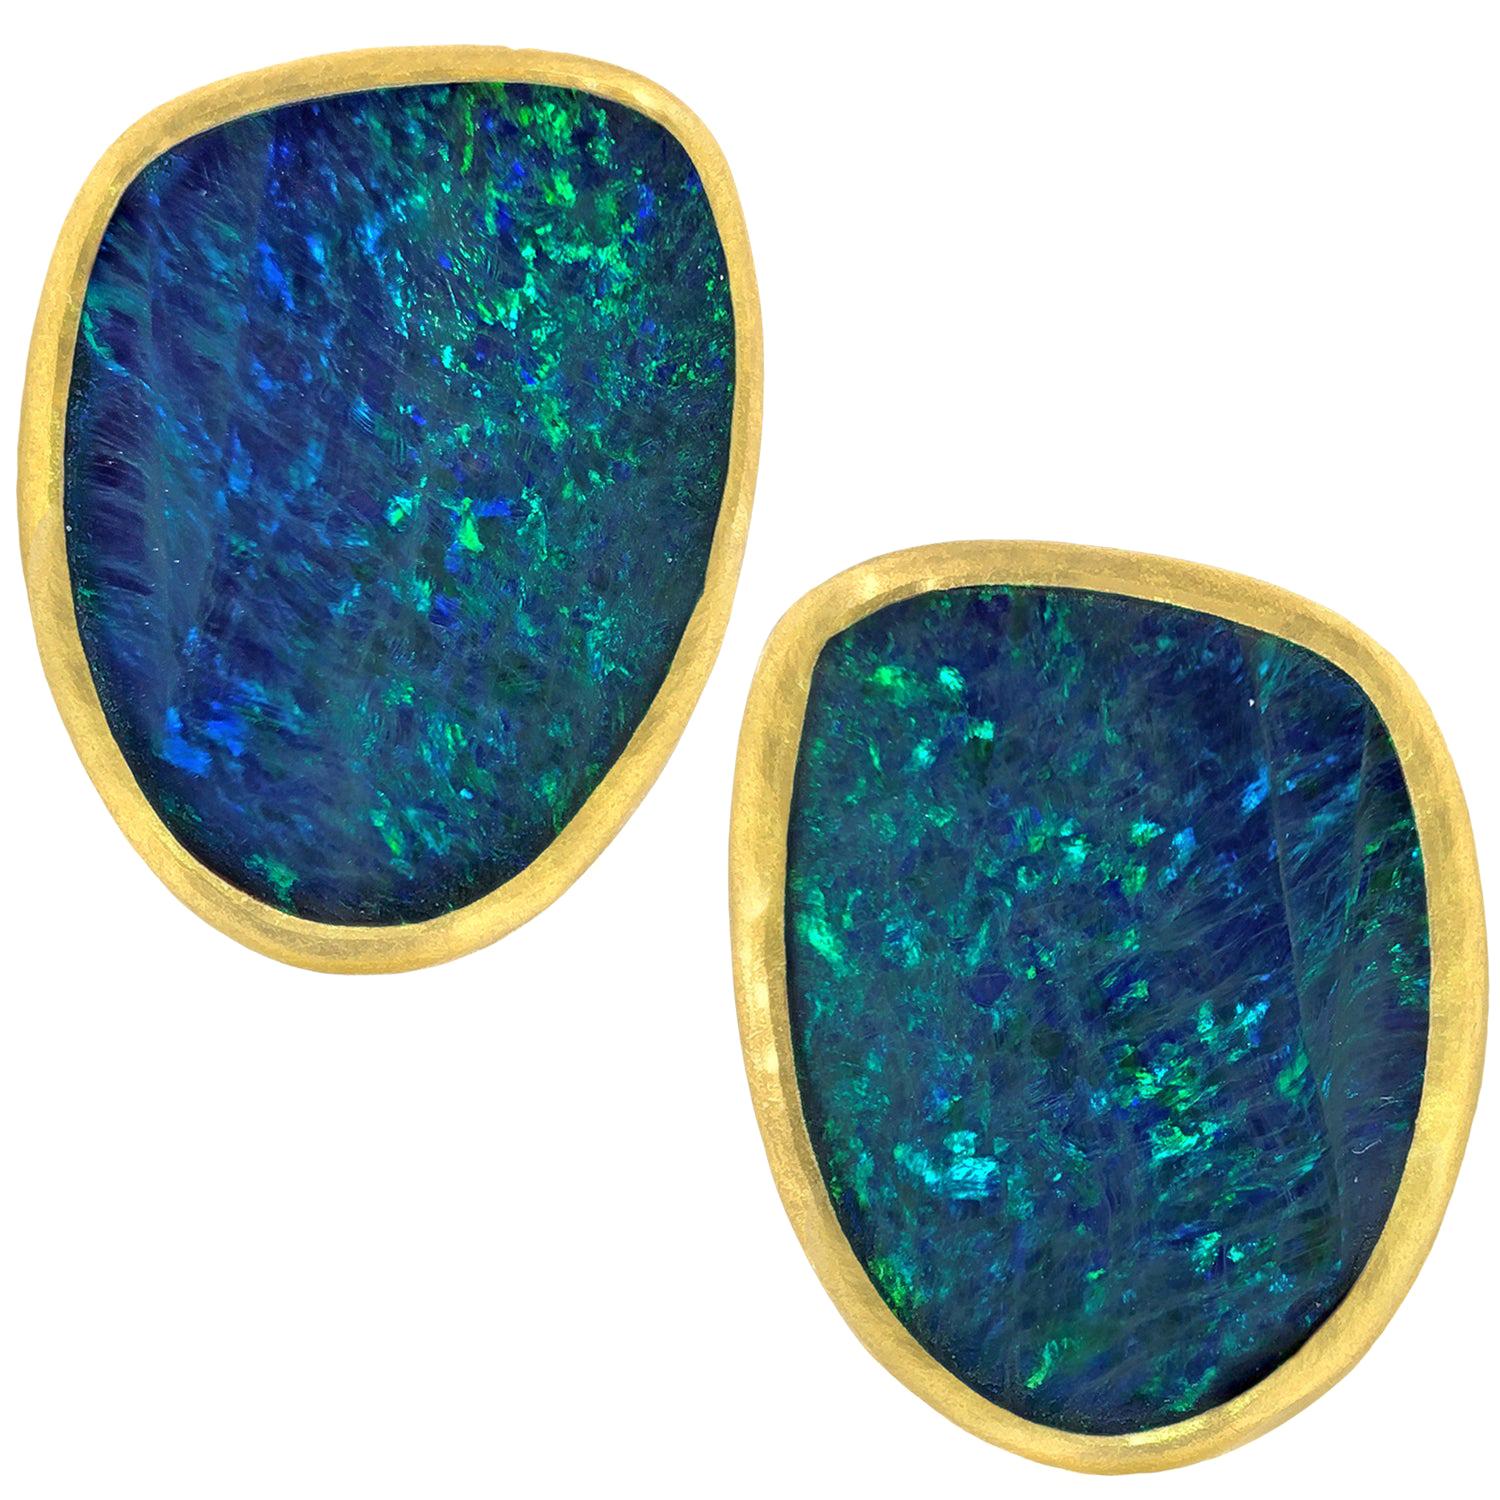 Petra Class One-of-a-Kind Opal Doublet Gold Large Clip Stud Earrings